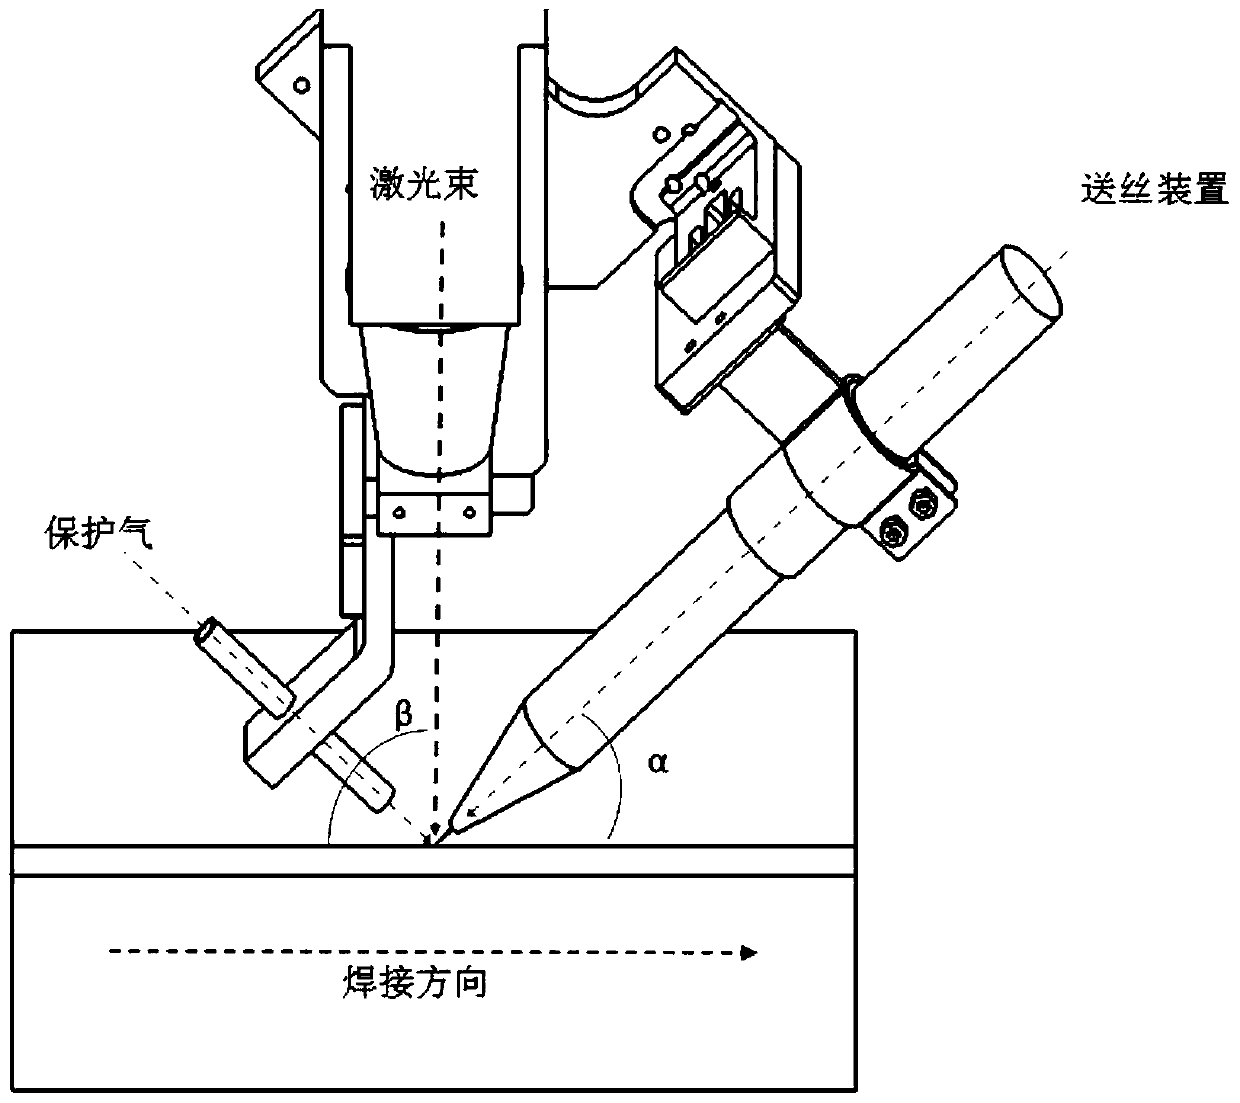 Swinging laser filler wire welding method of medium-thickness plate T-shaped joint fillet welding seam